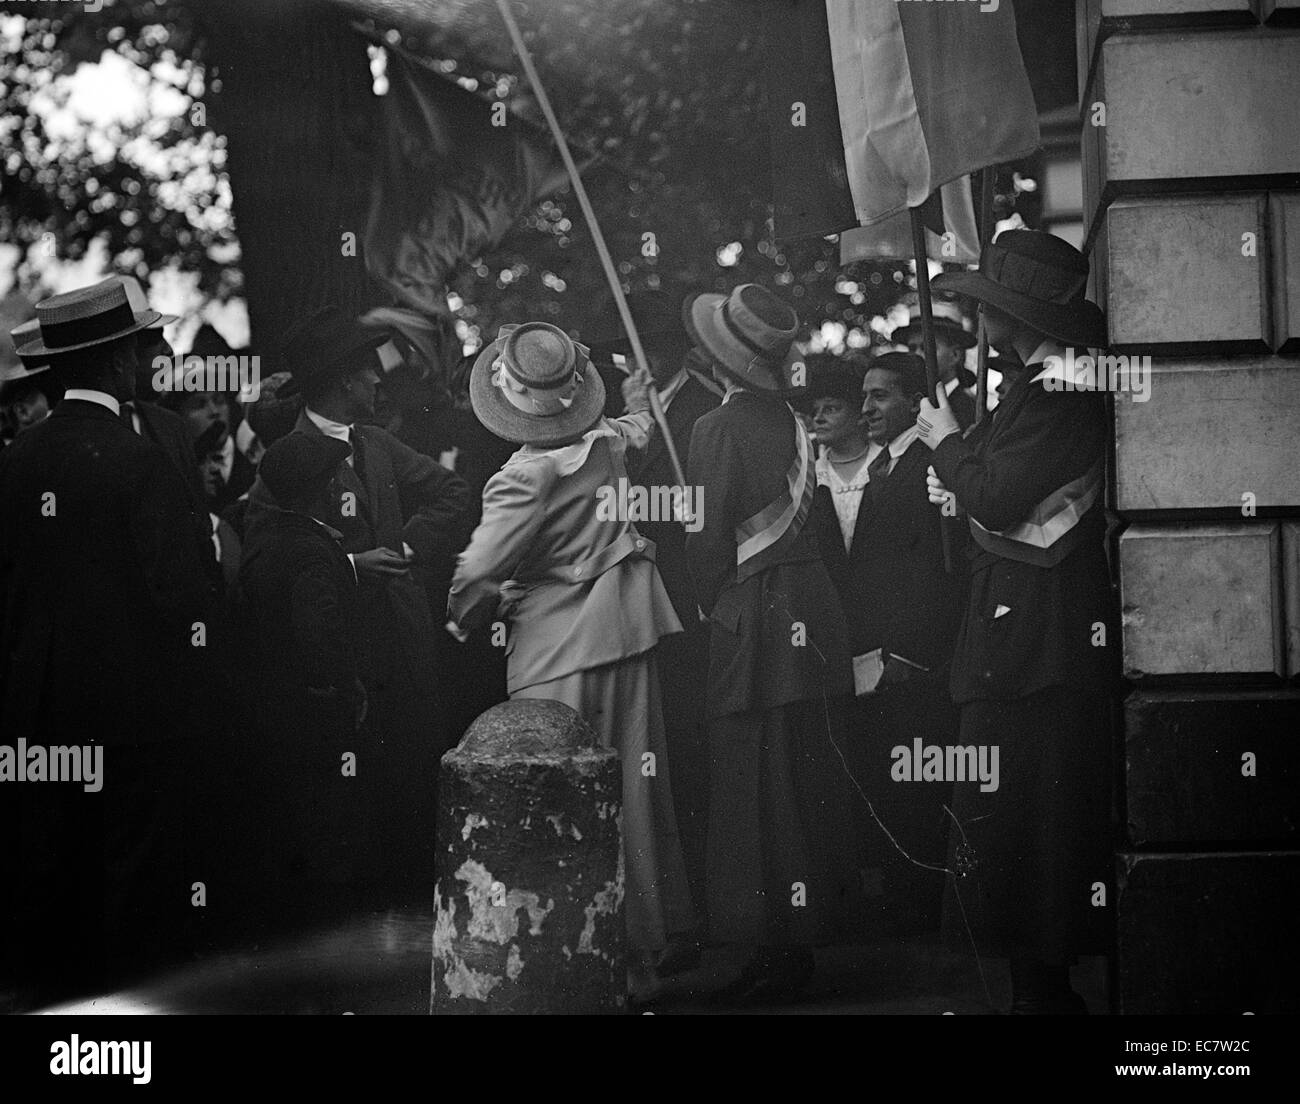 Women's suffrage riots. Women fighting for their right to vote around 1910. Stock Photo